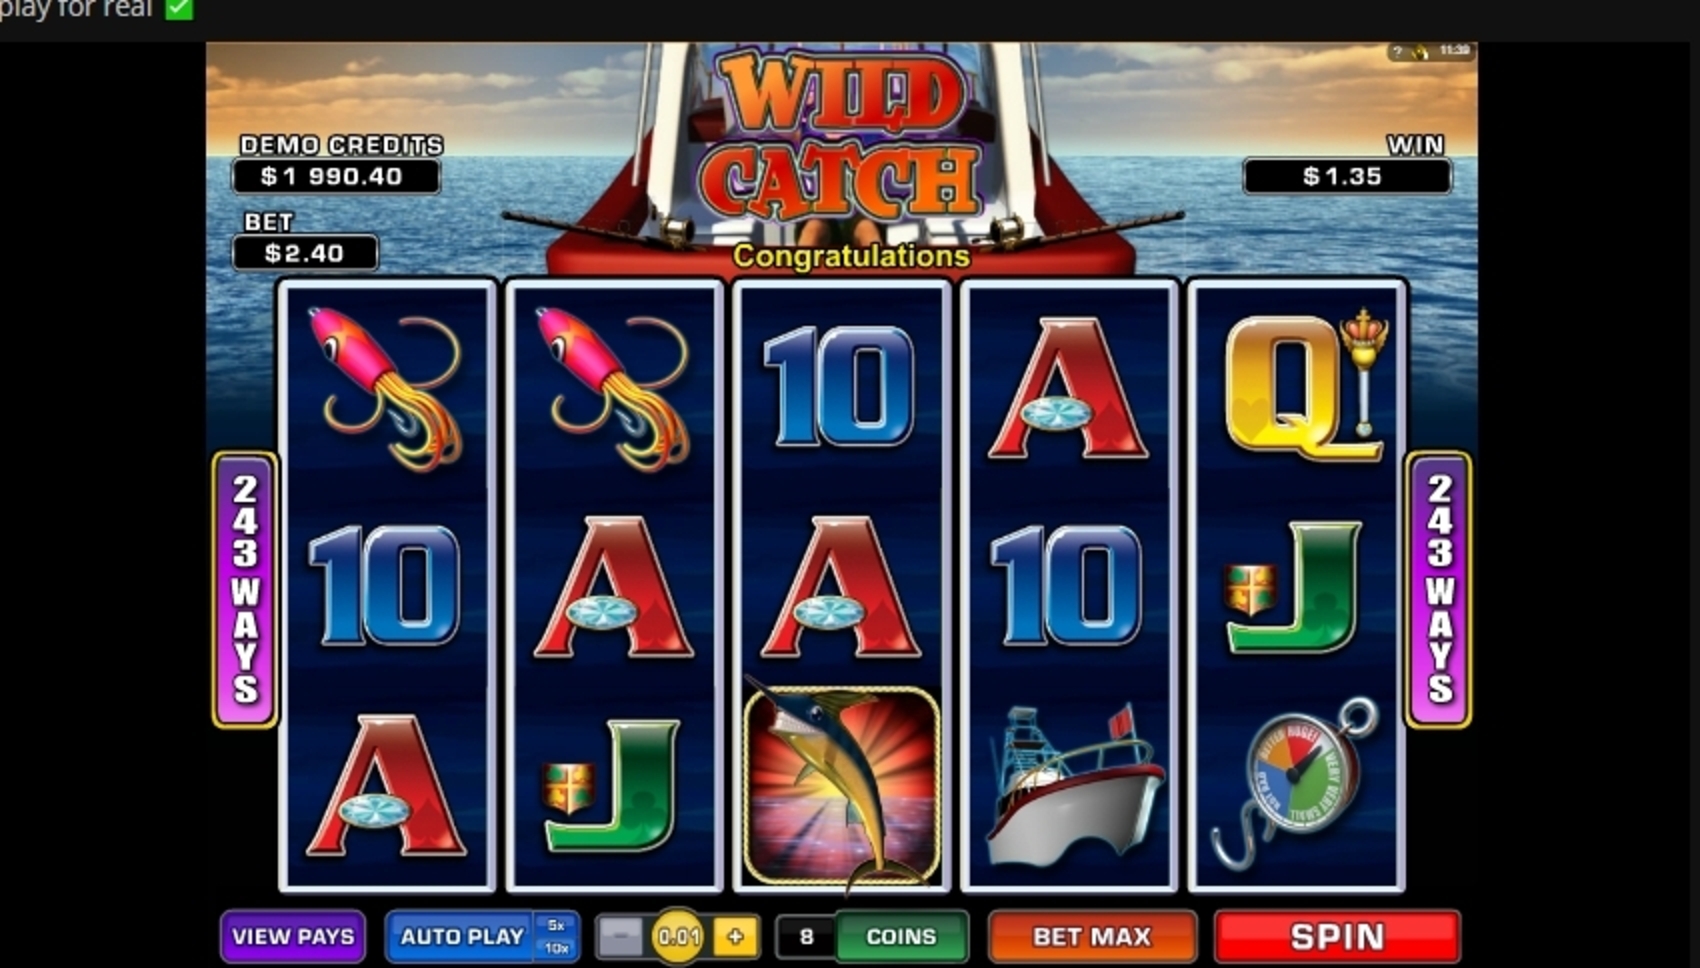 Win Money in Wild Catch Free Slot Game by Microgaming